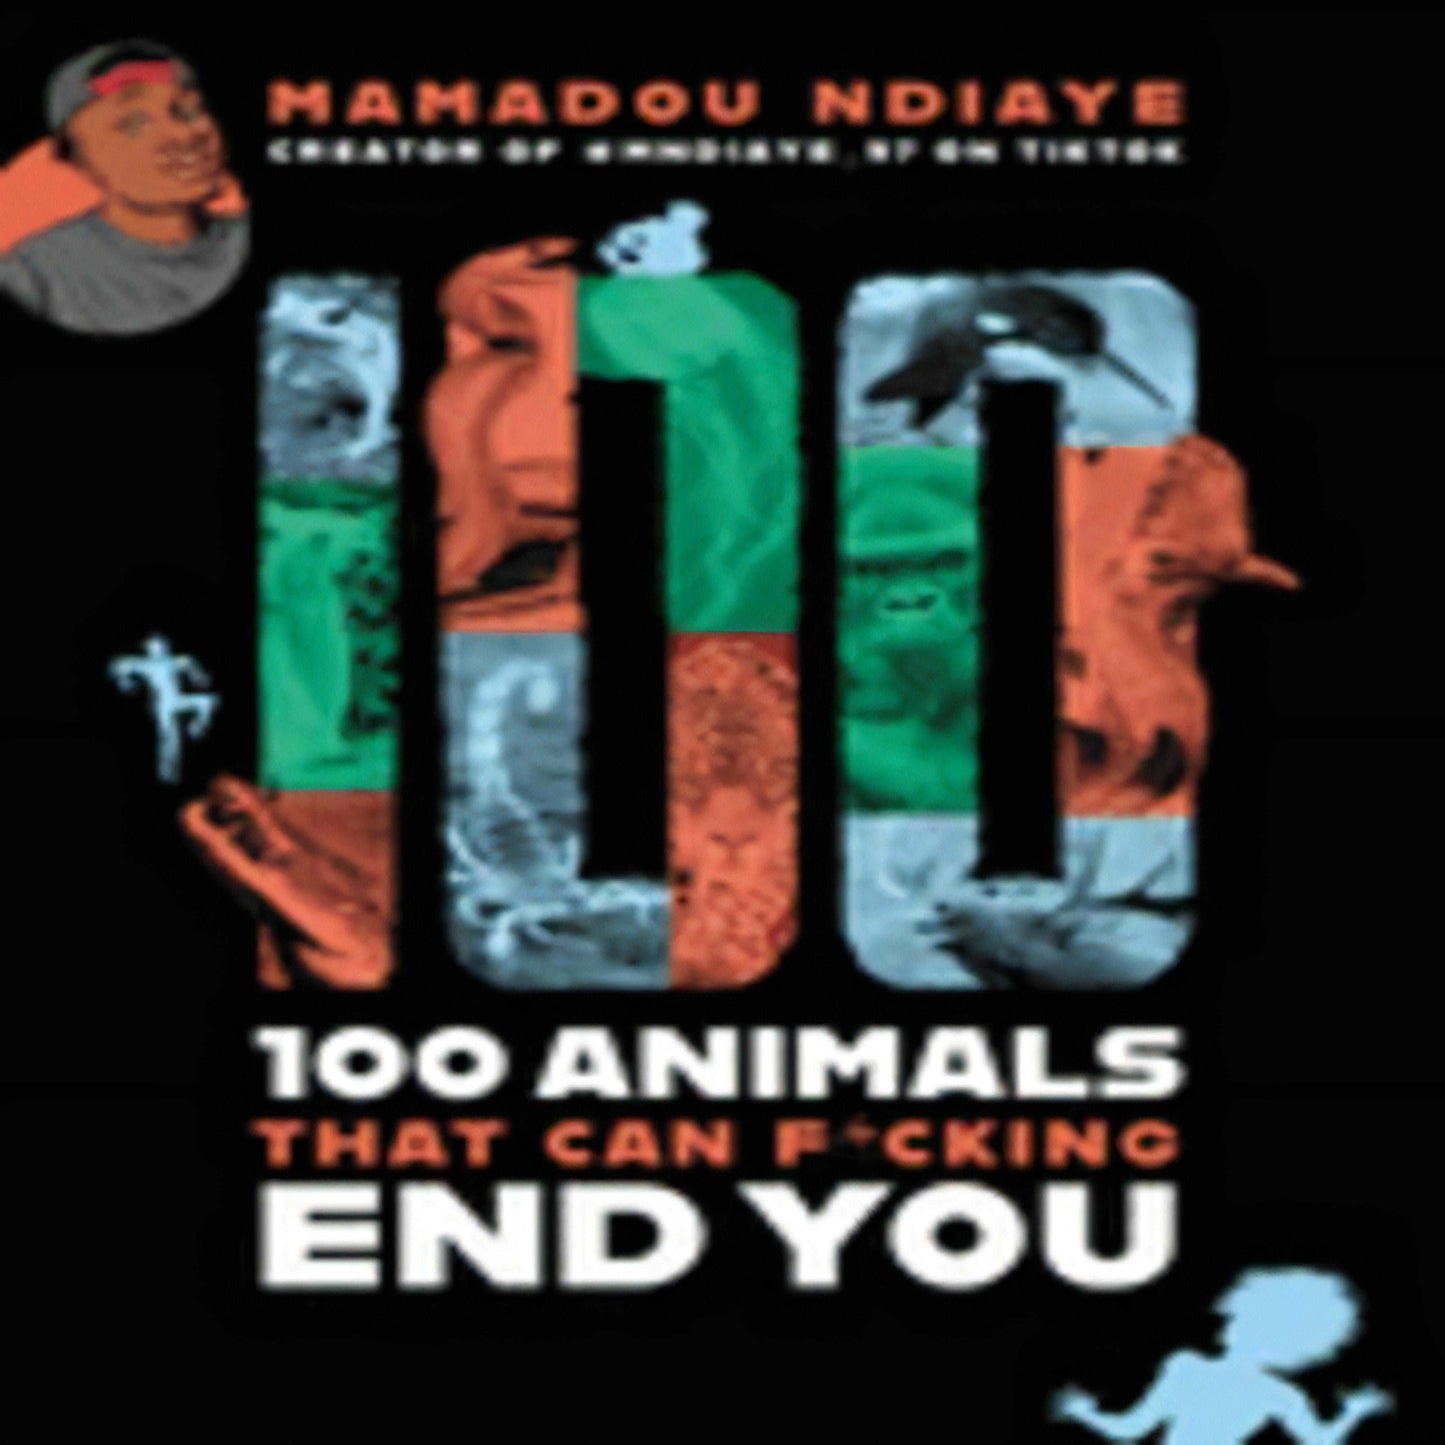 100 Animals That Can F*cking End You219-031423-0316453773DPGBOOKSTORE.COM. Today's Bestsellers.